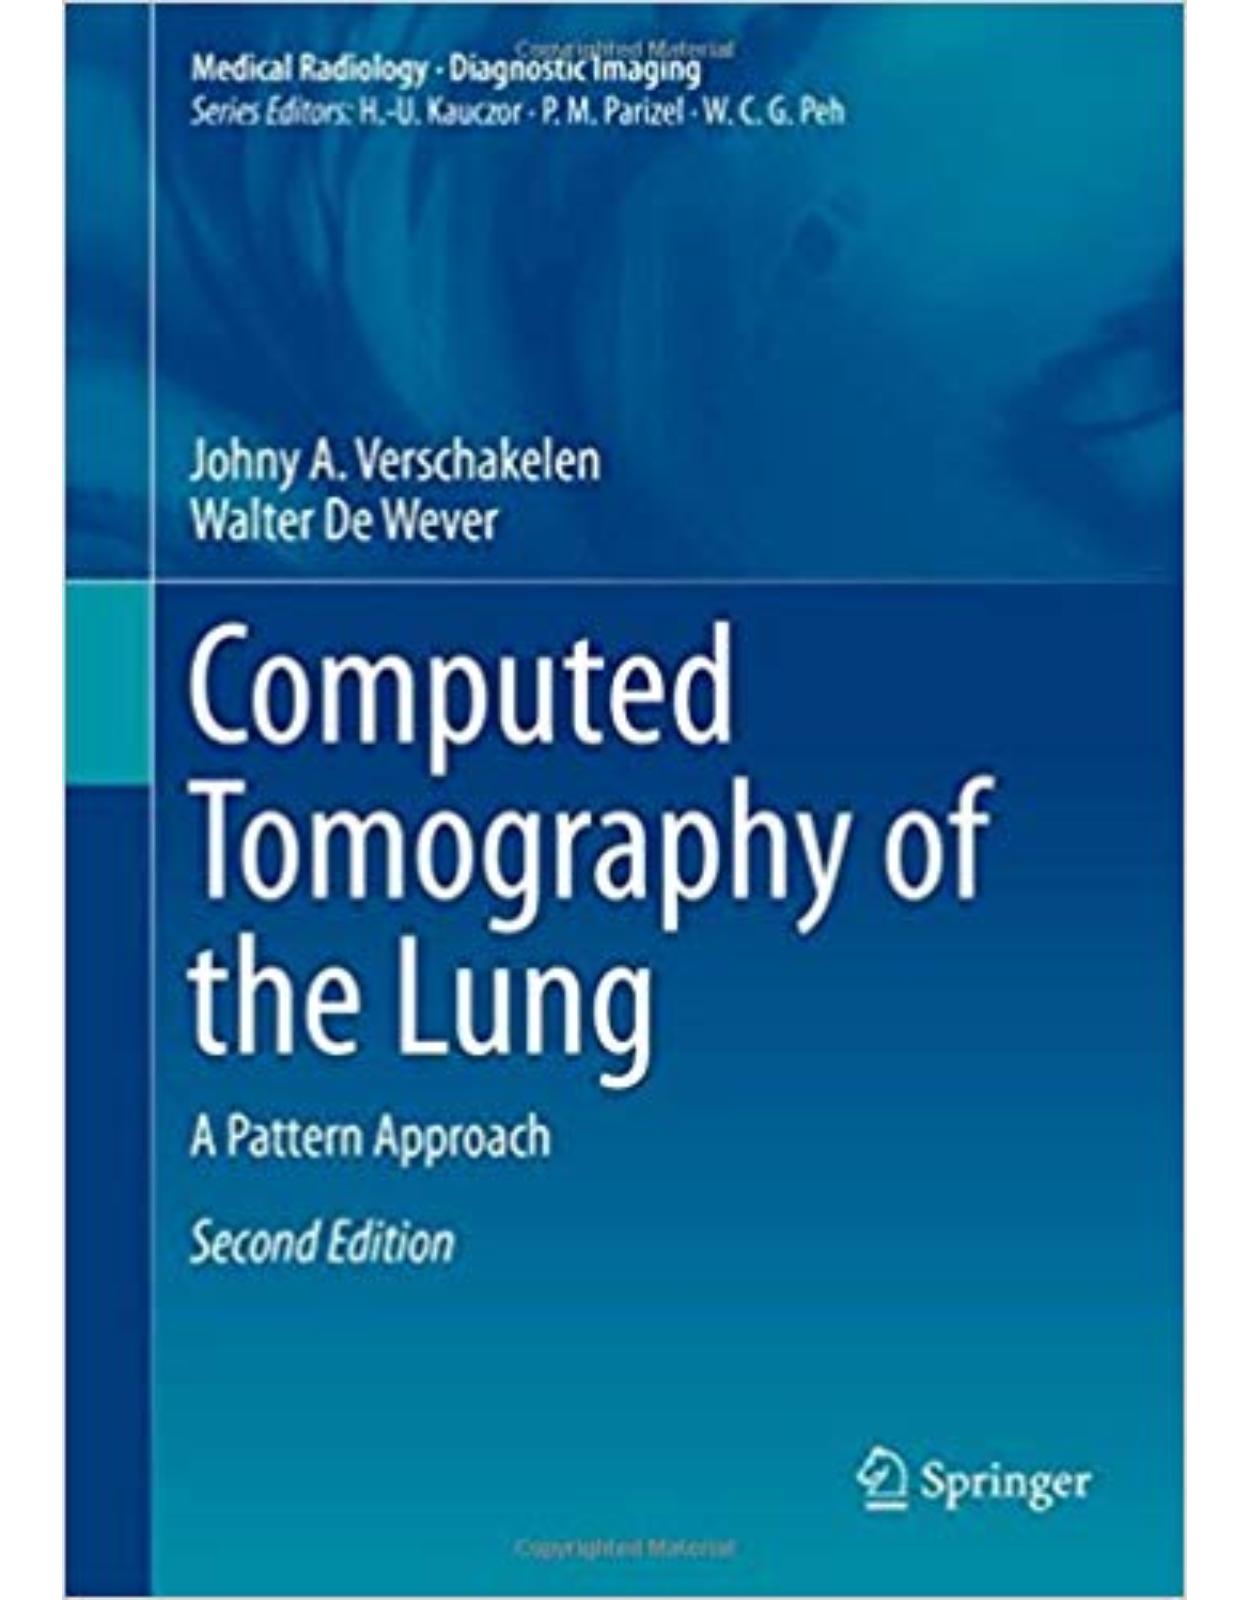 Computed Tomography of the Lung: A Pattern Approach